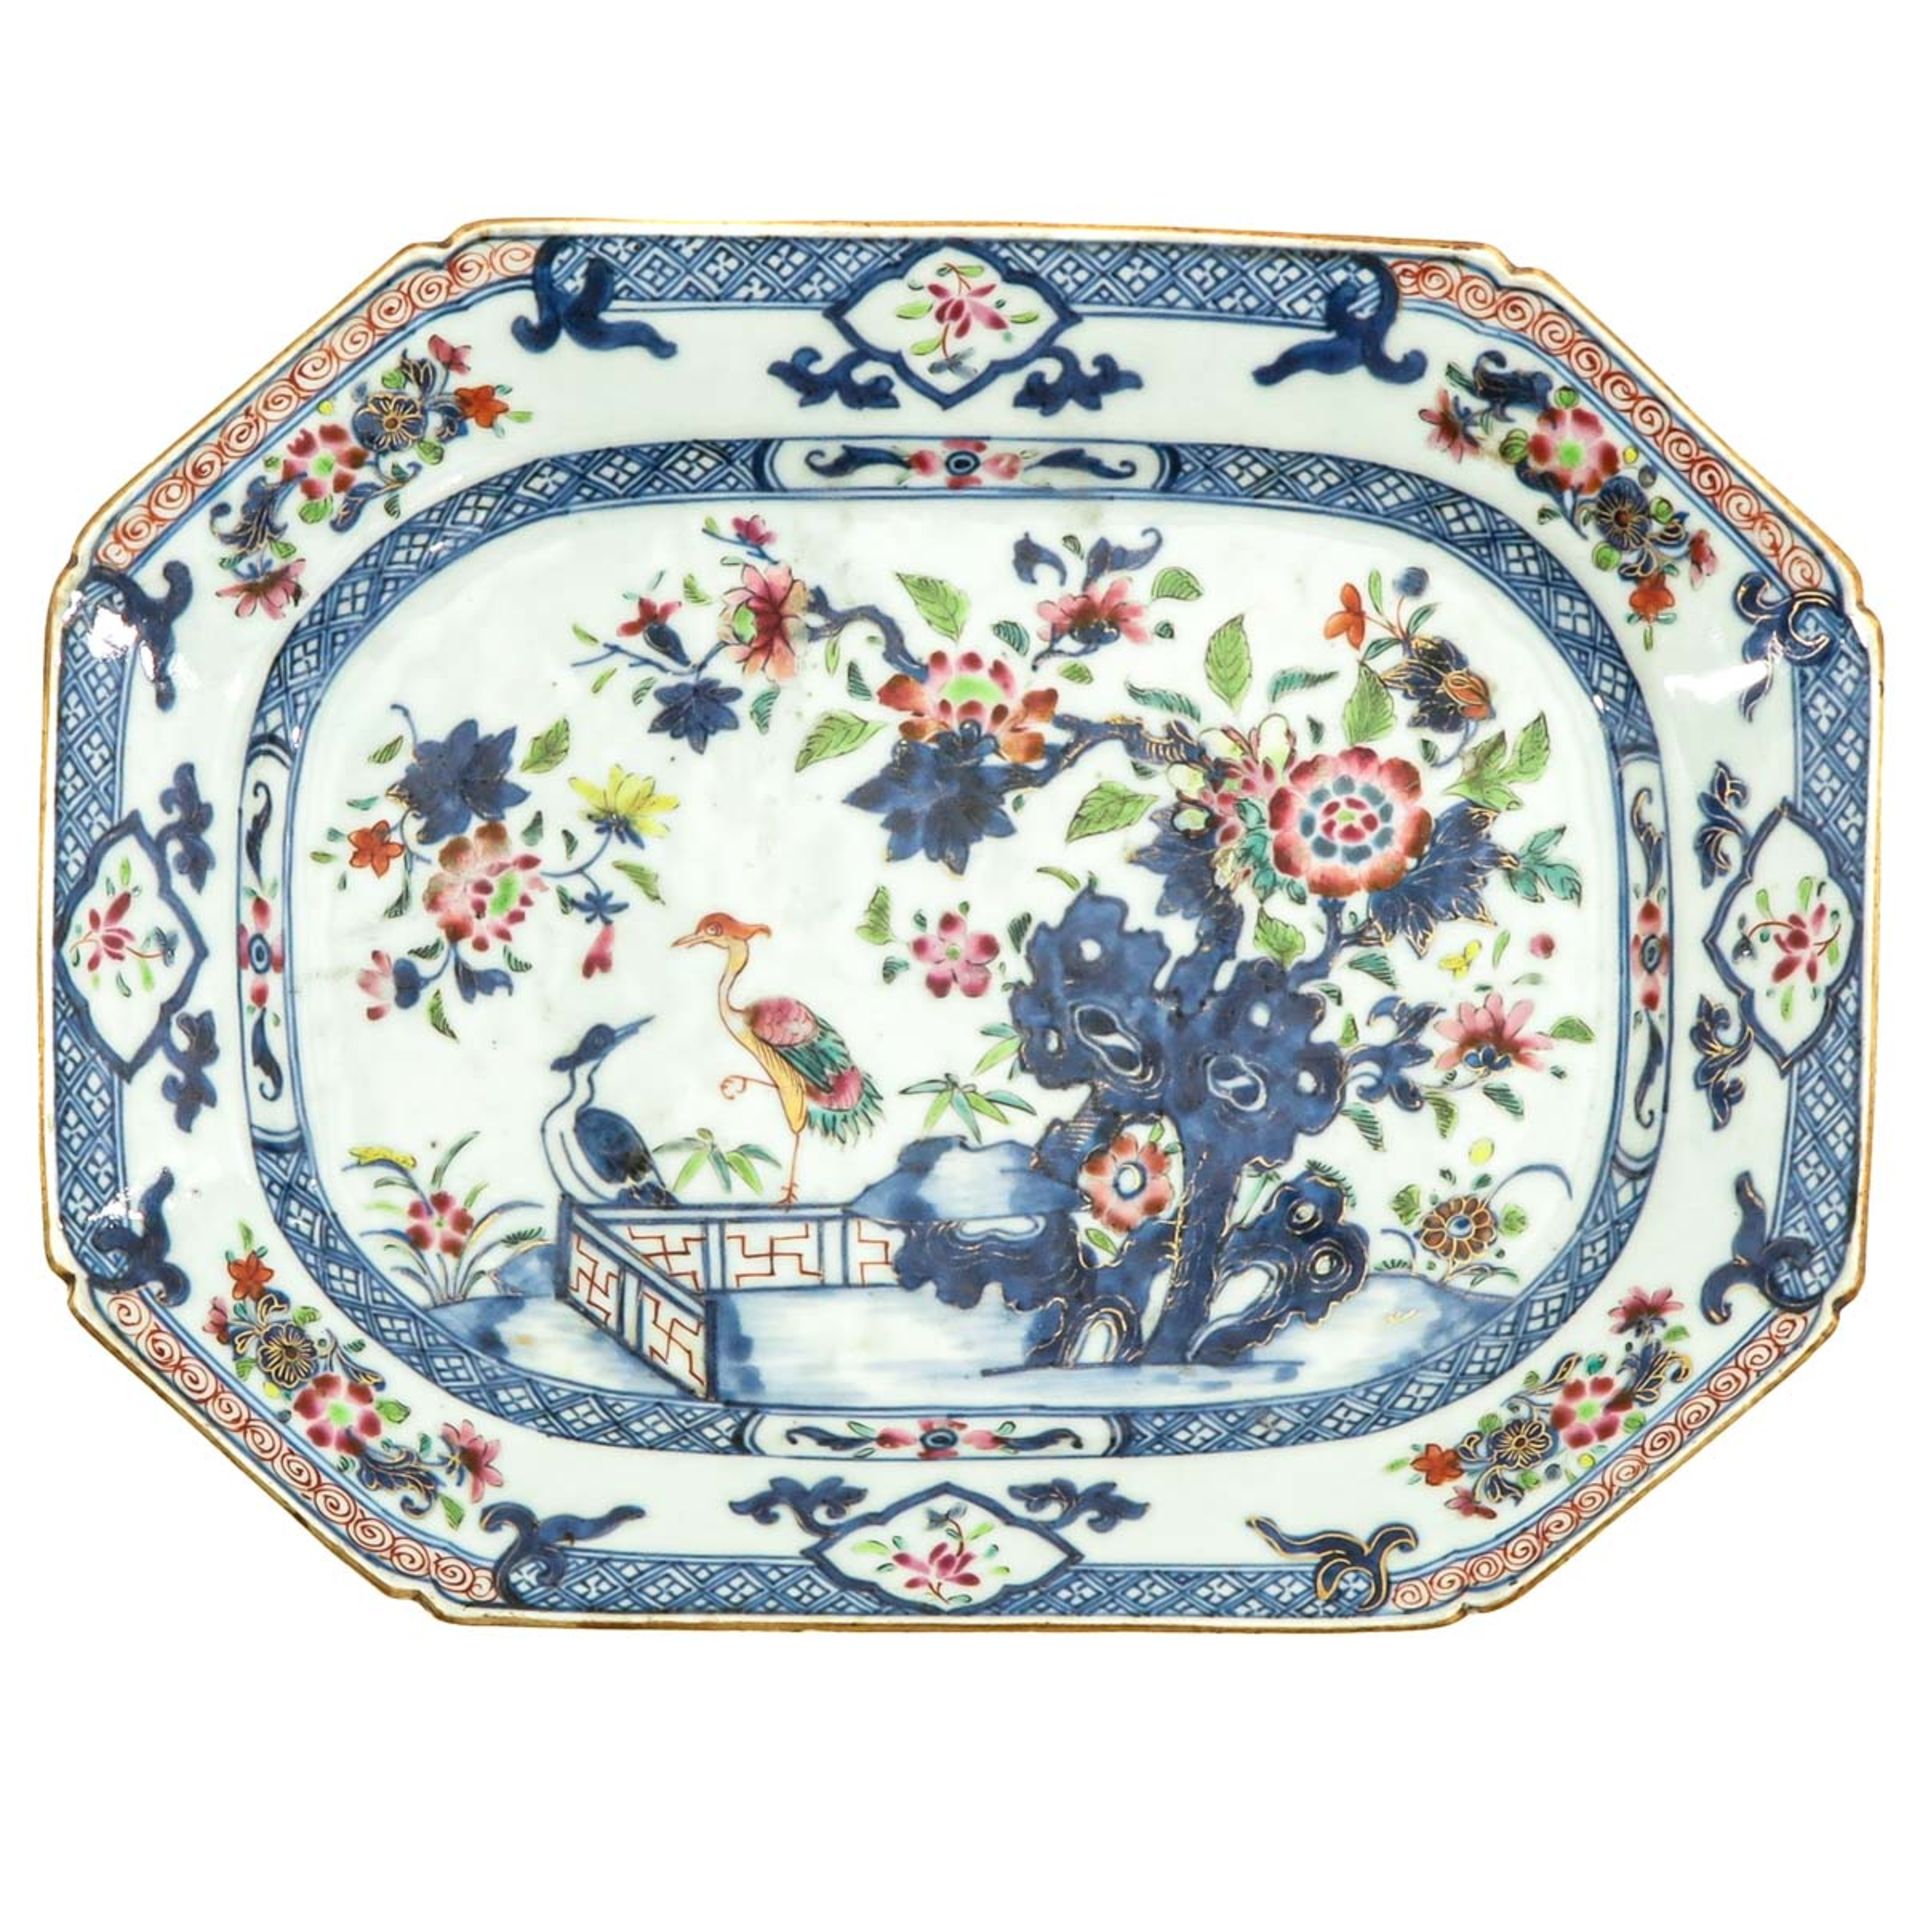 A Pair of Serving Trays - Image 5 of 9